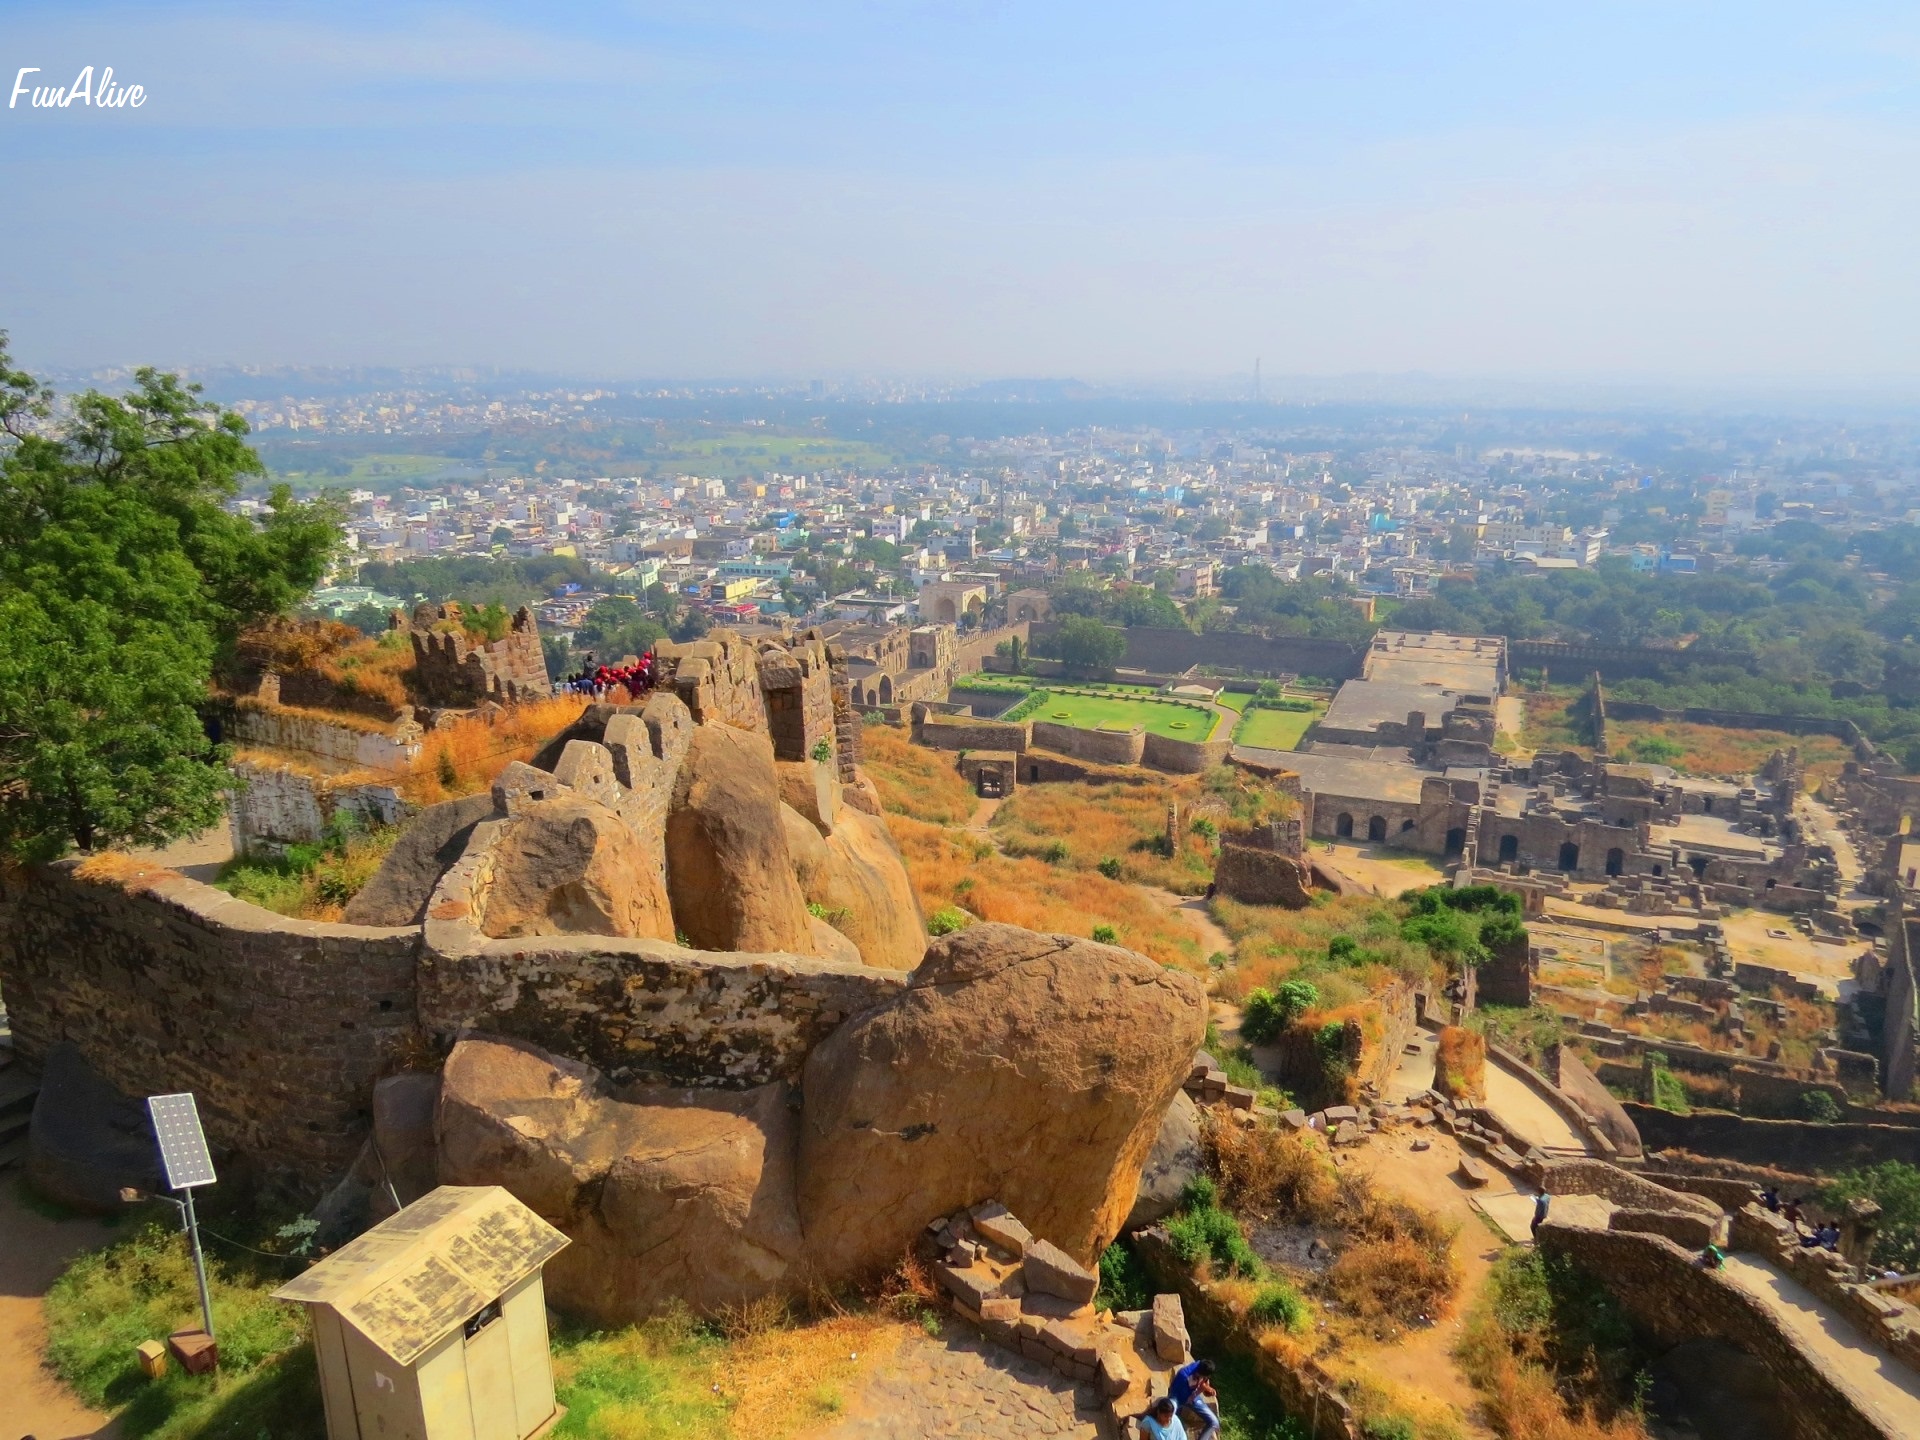 Golkonda Fort - The Majestic and Imposing Monument Of Hyderabad